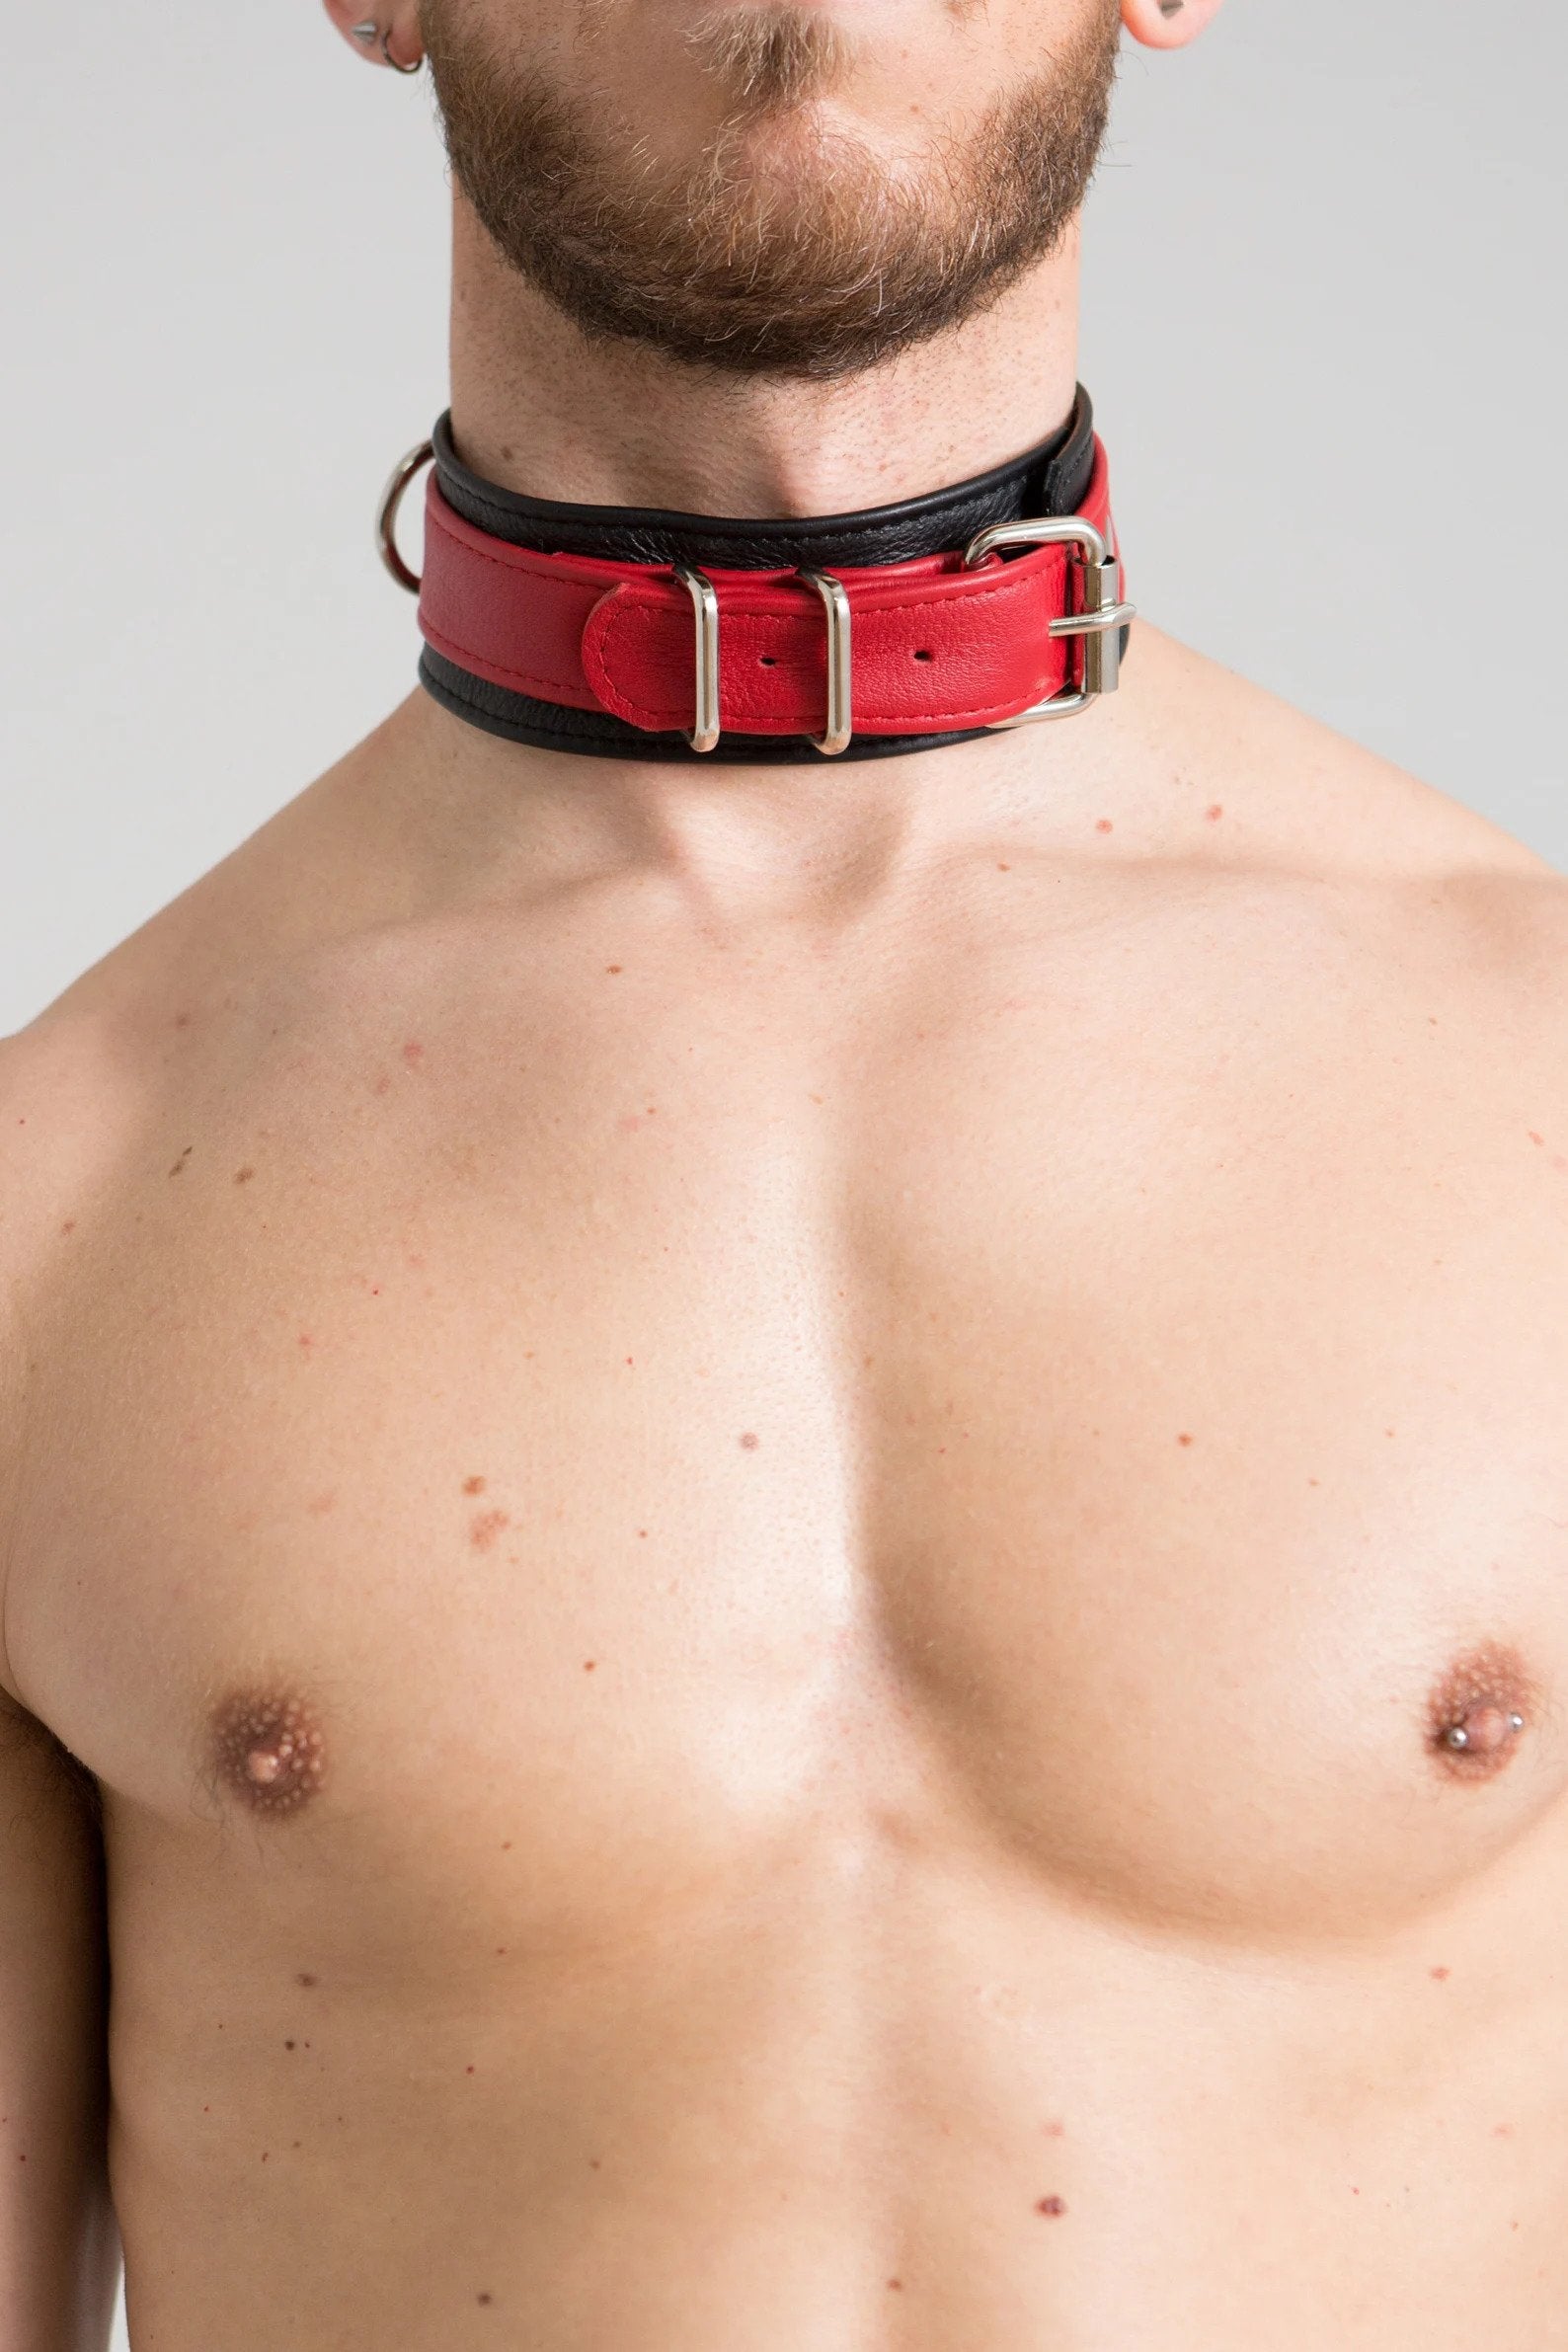 Model wearing red and black leather collar